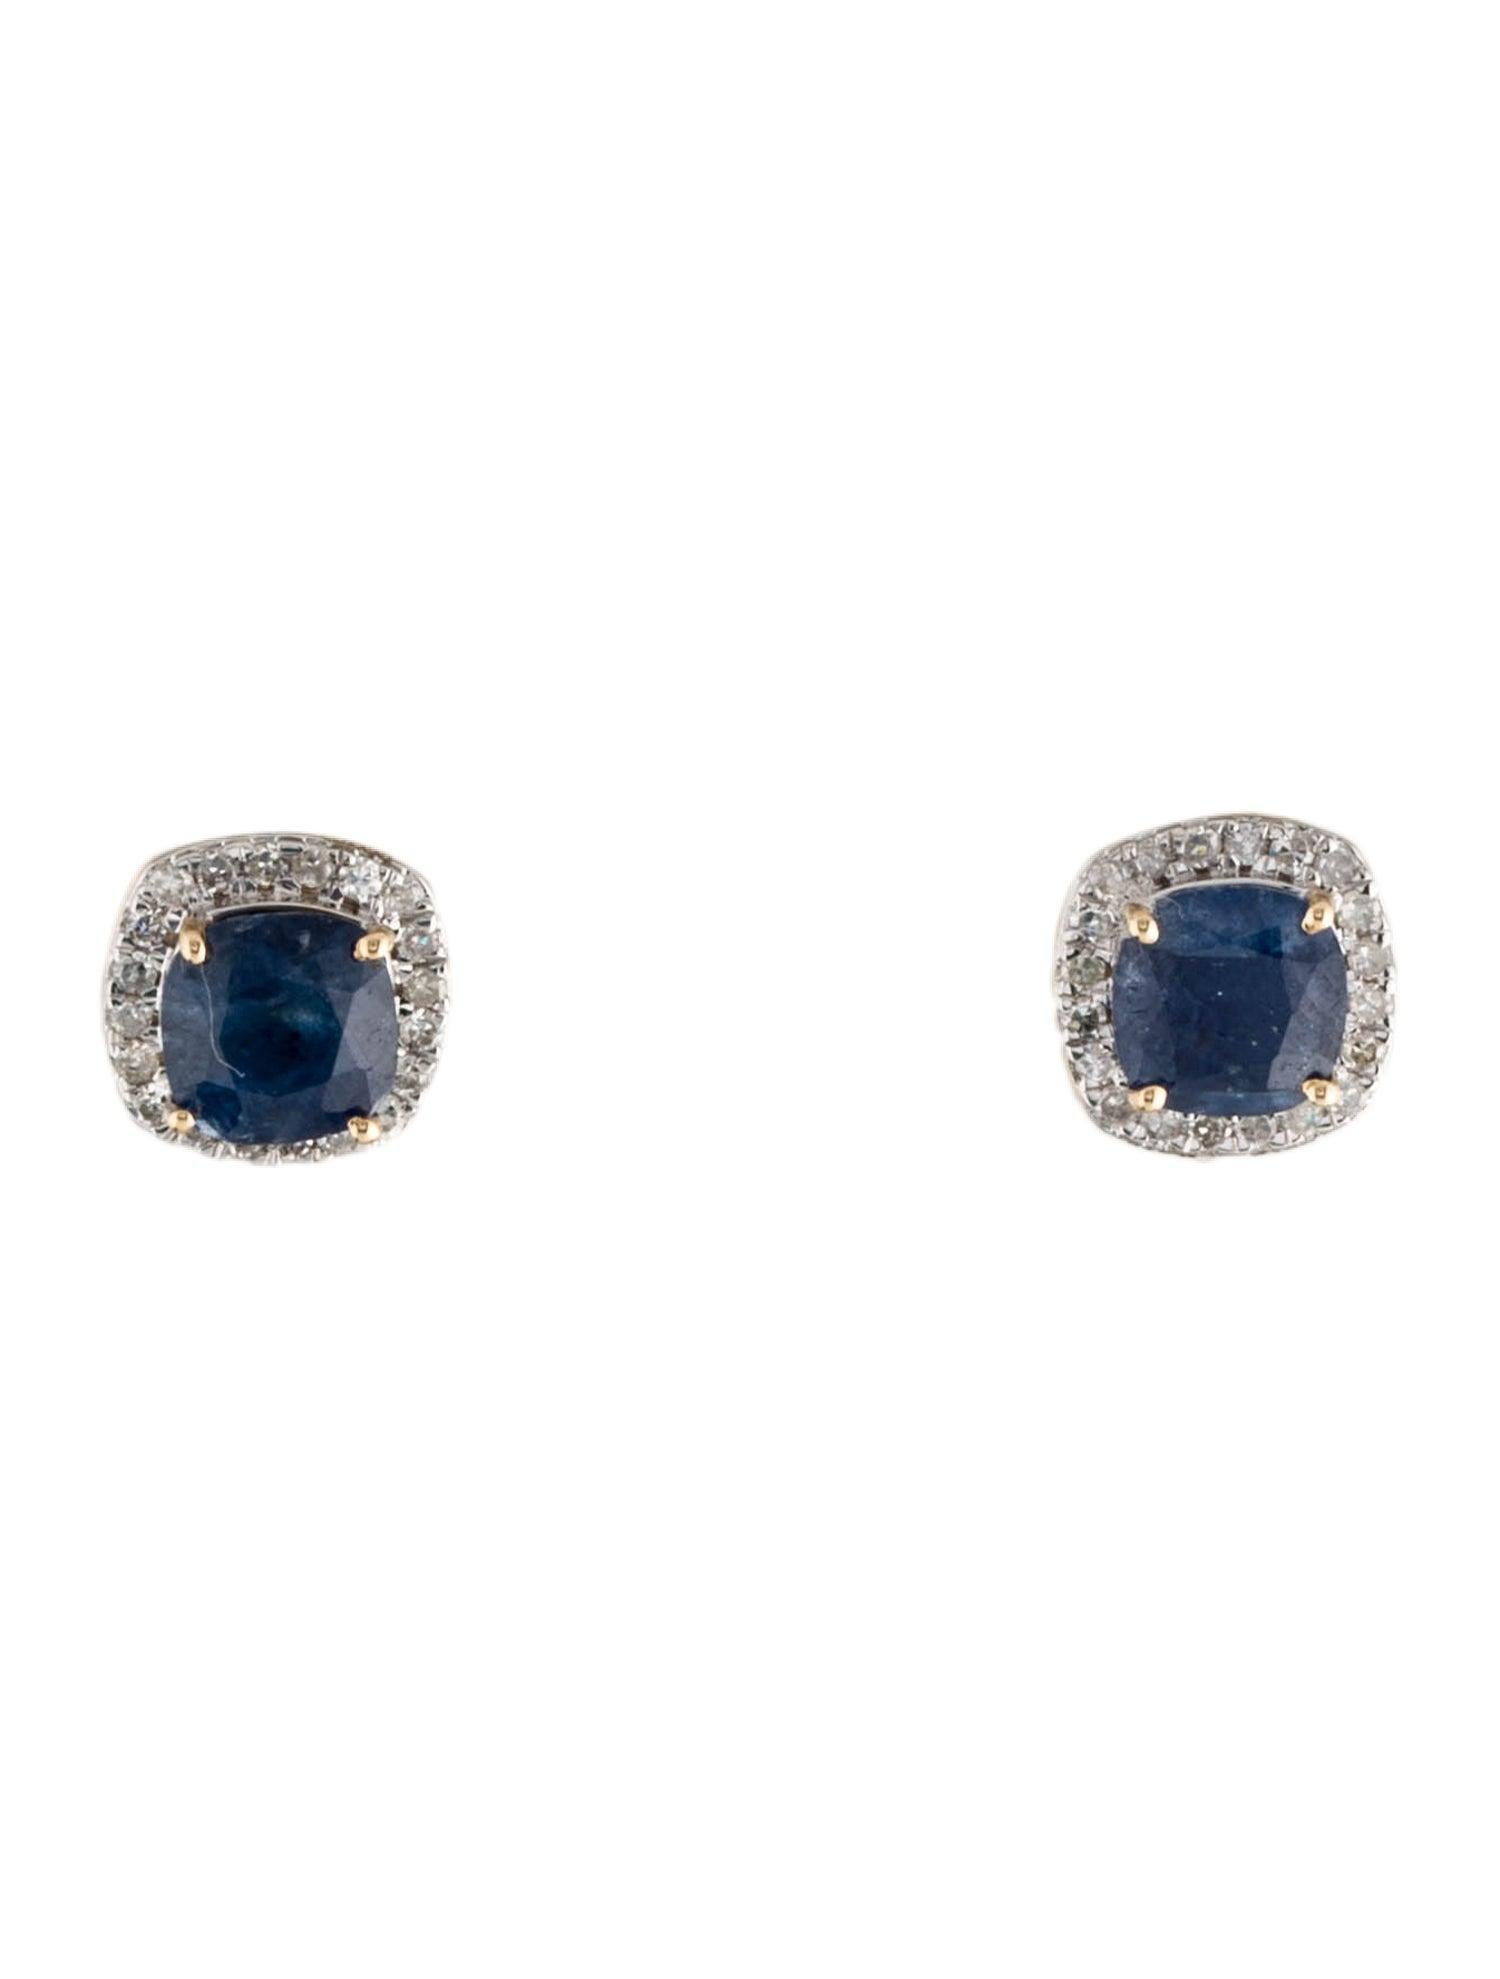 Indulge in sophistication with our exquisite 14K Sapphire & Diamond Stud Earrings, a fusion of timeless elegance and contemporary style. Crafted from lustrous 14K yellow gold and accentuated with gold-tone metal, these earrings feature two cushion